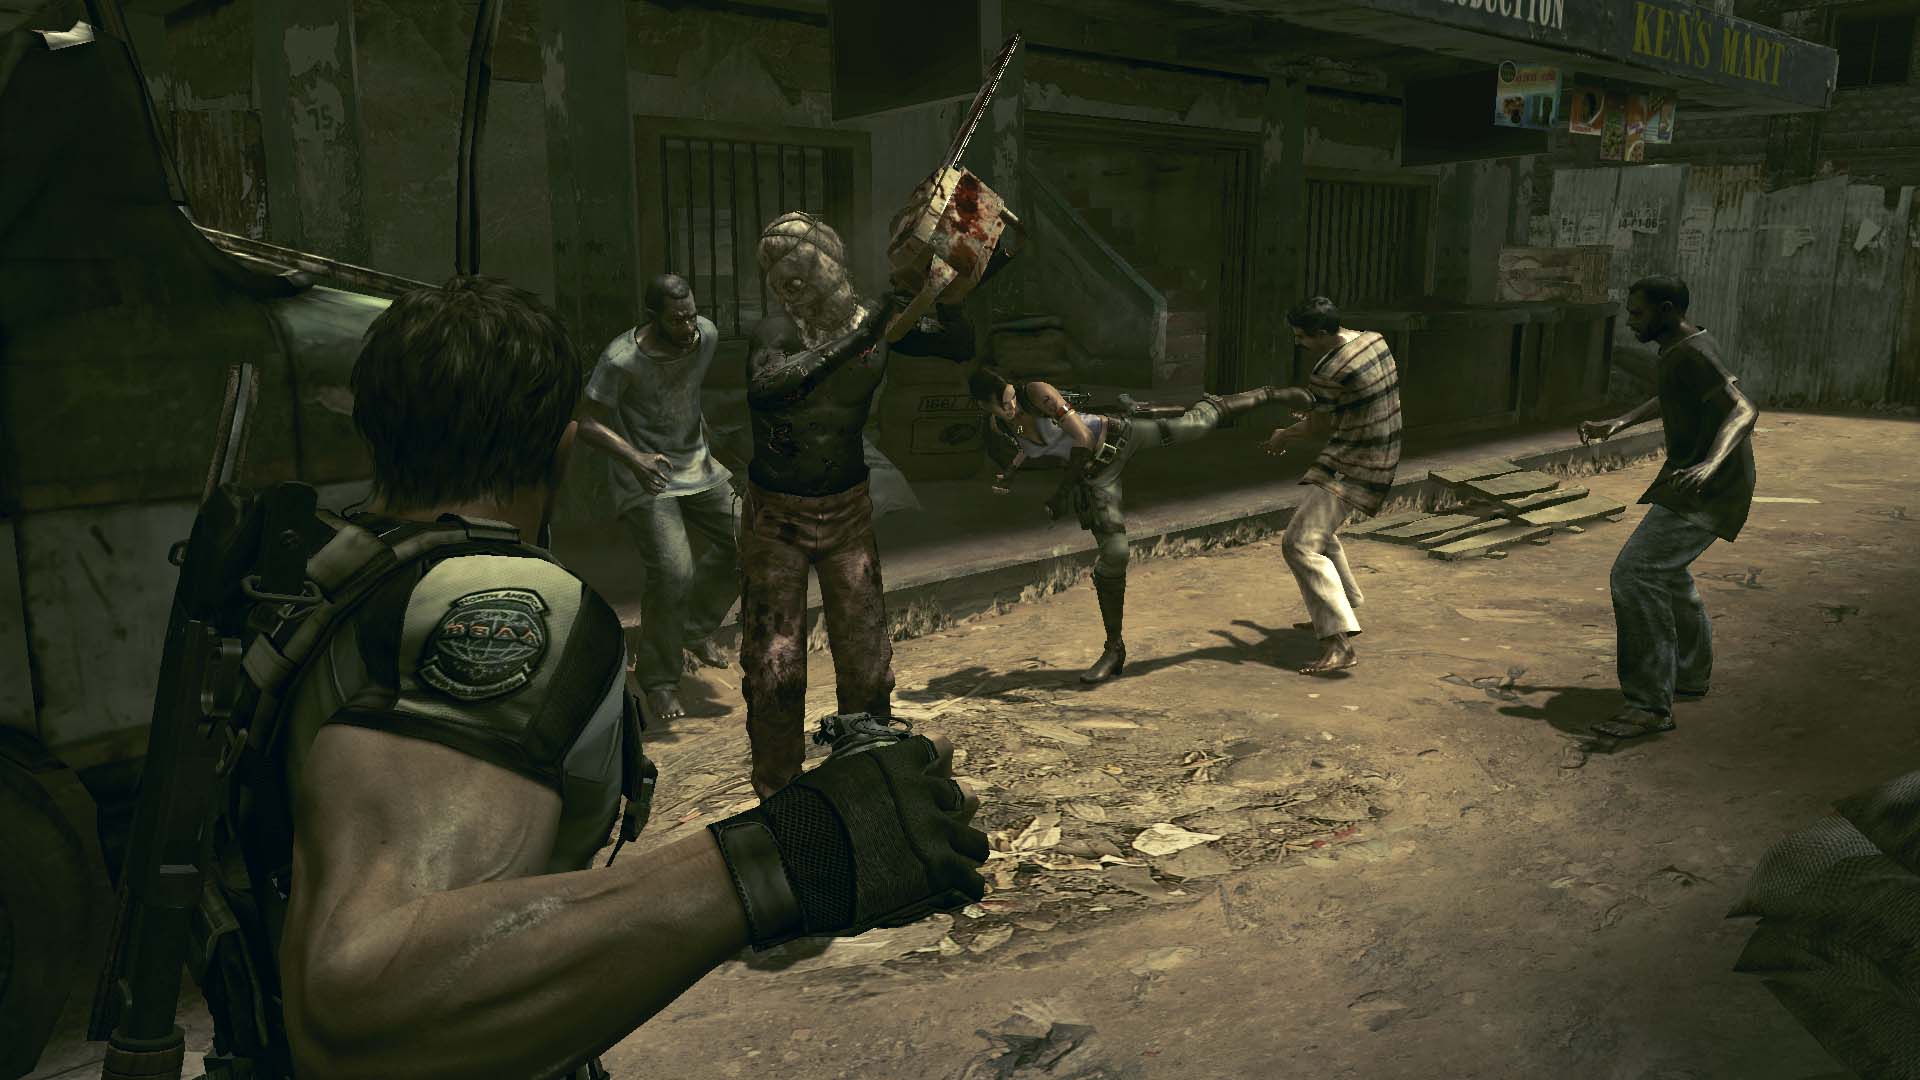 Review: Resident Evil 5 (Xbox One/PlayStation4) - Rely on Horror